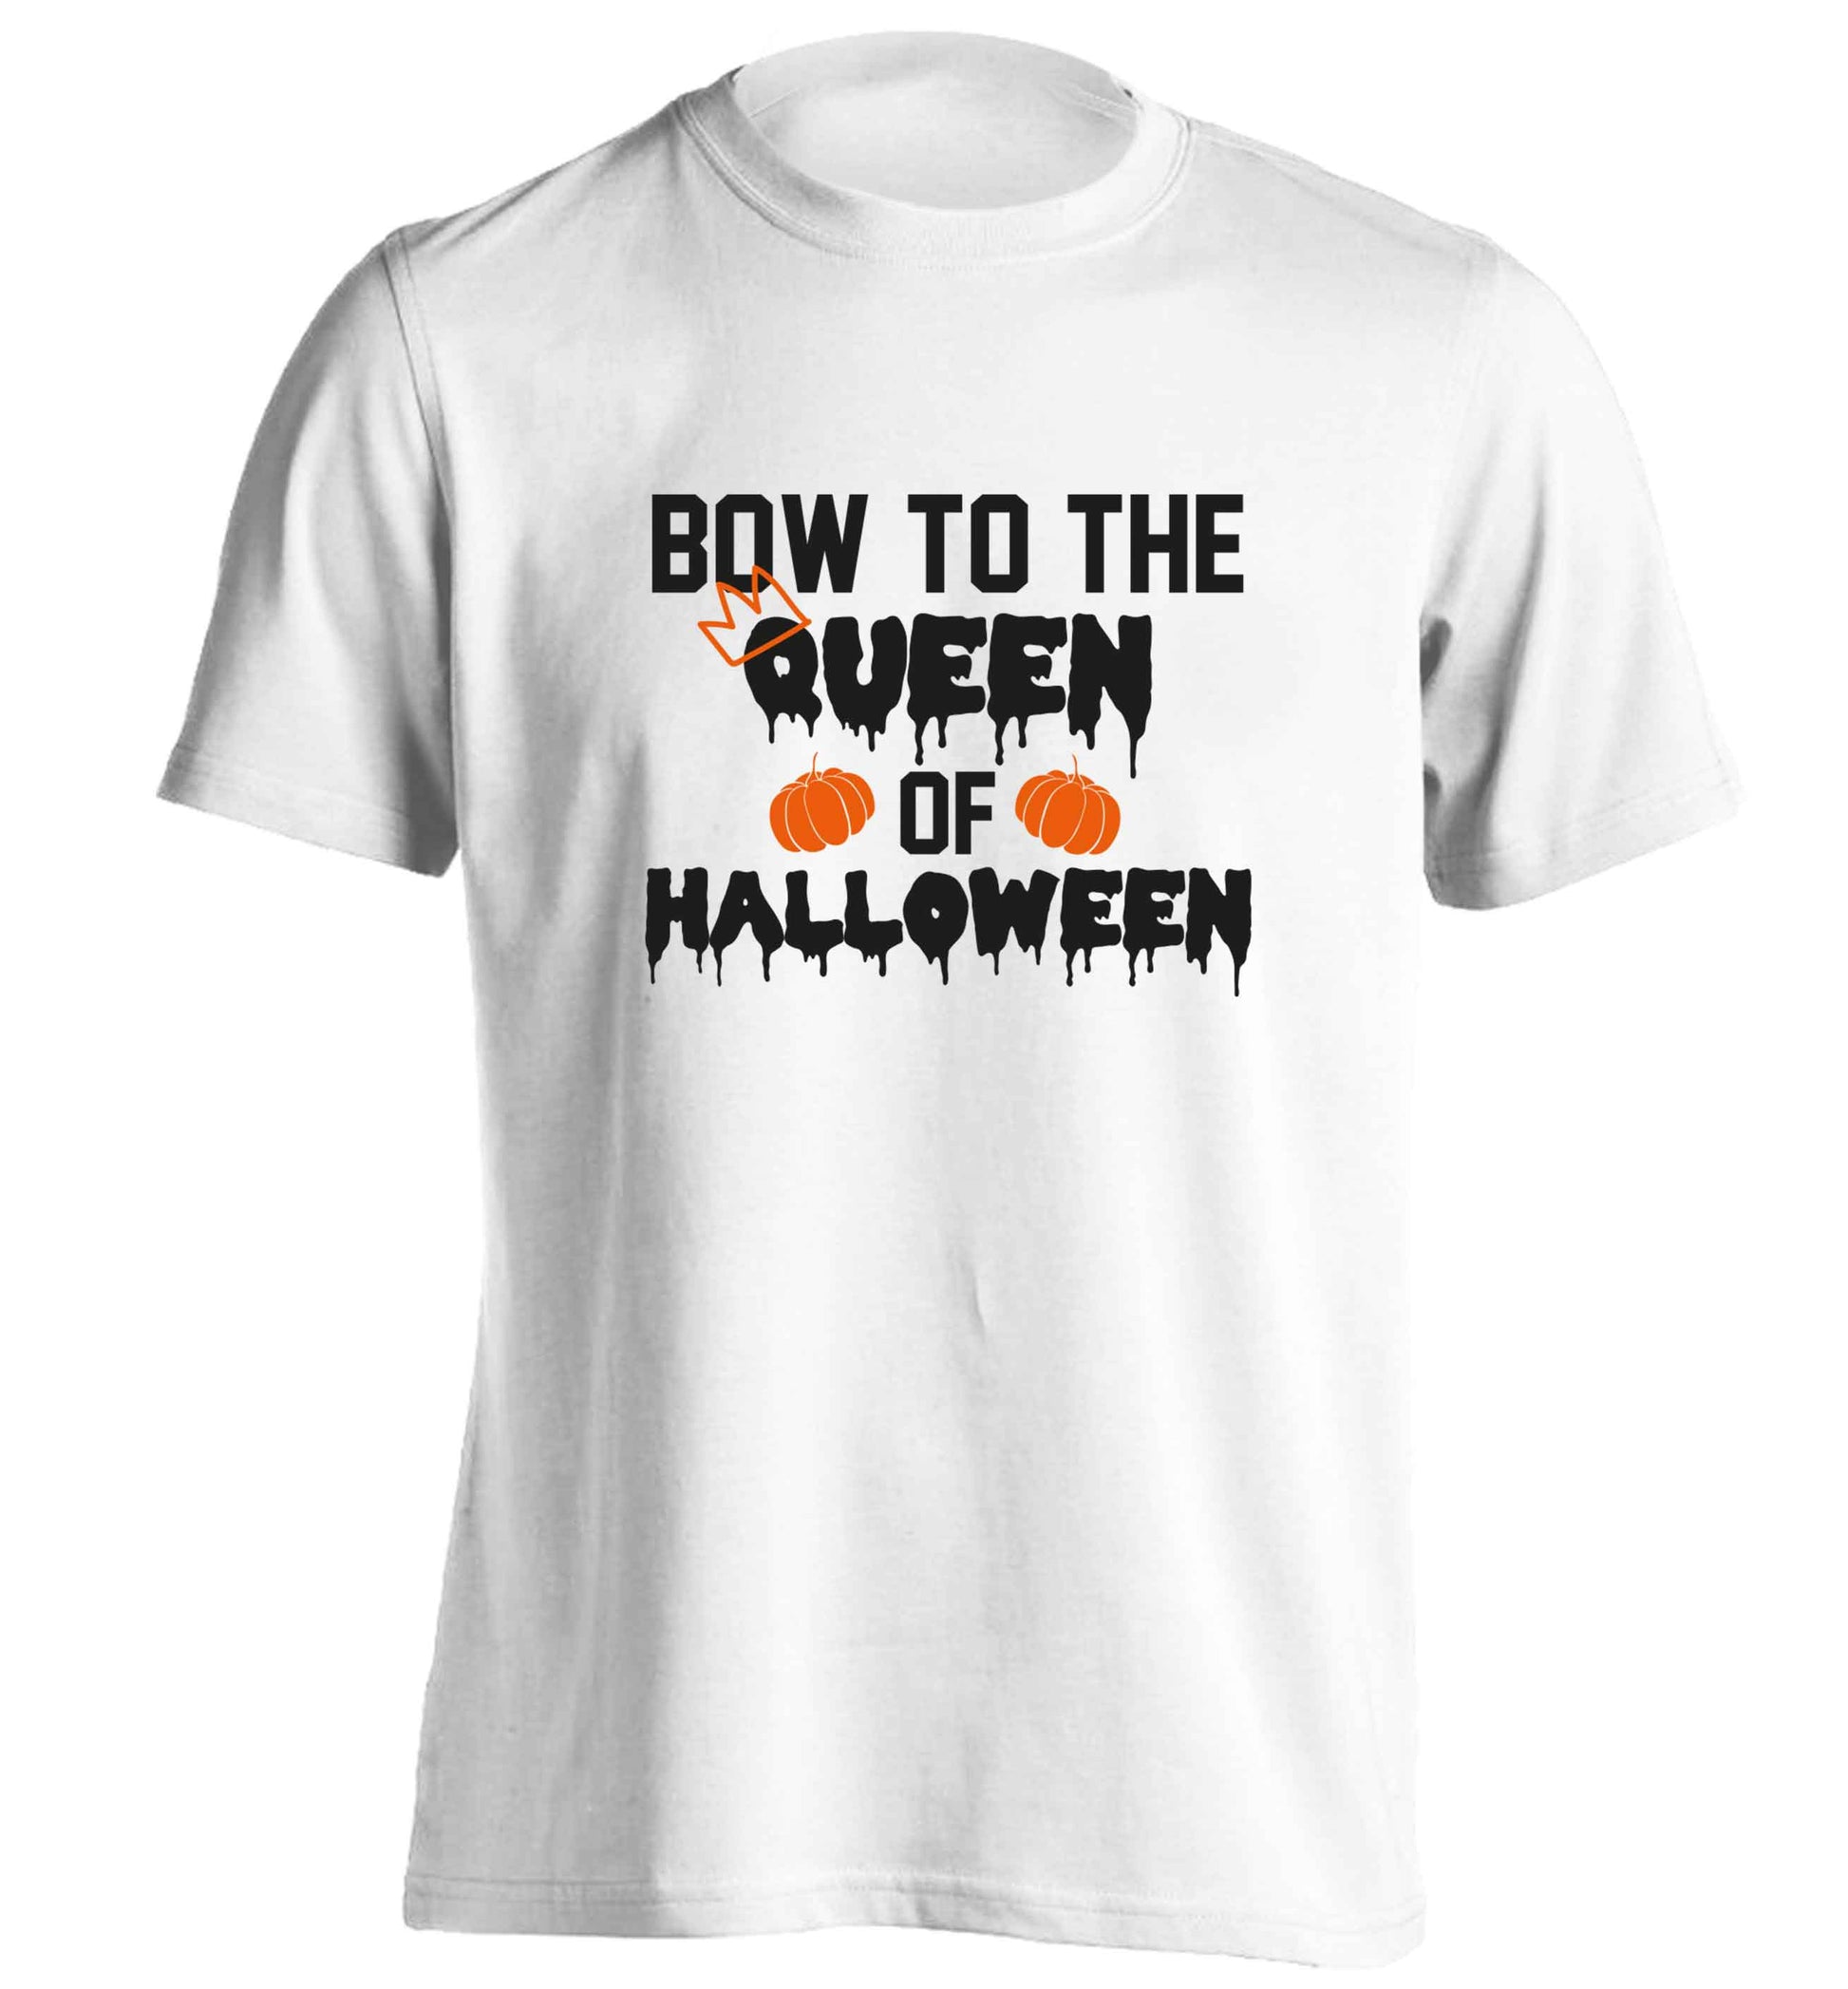 Bow to the Queen of halloween adults unisex white Tshirt 2XL